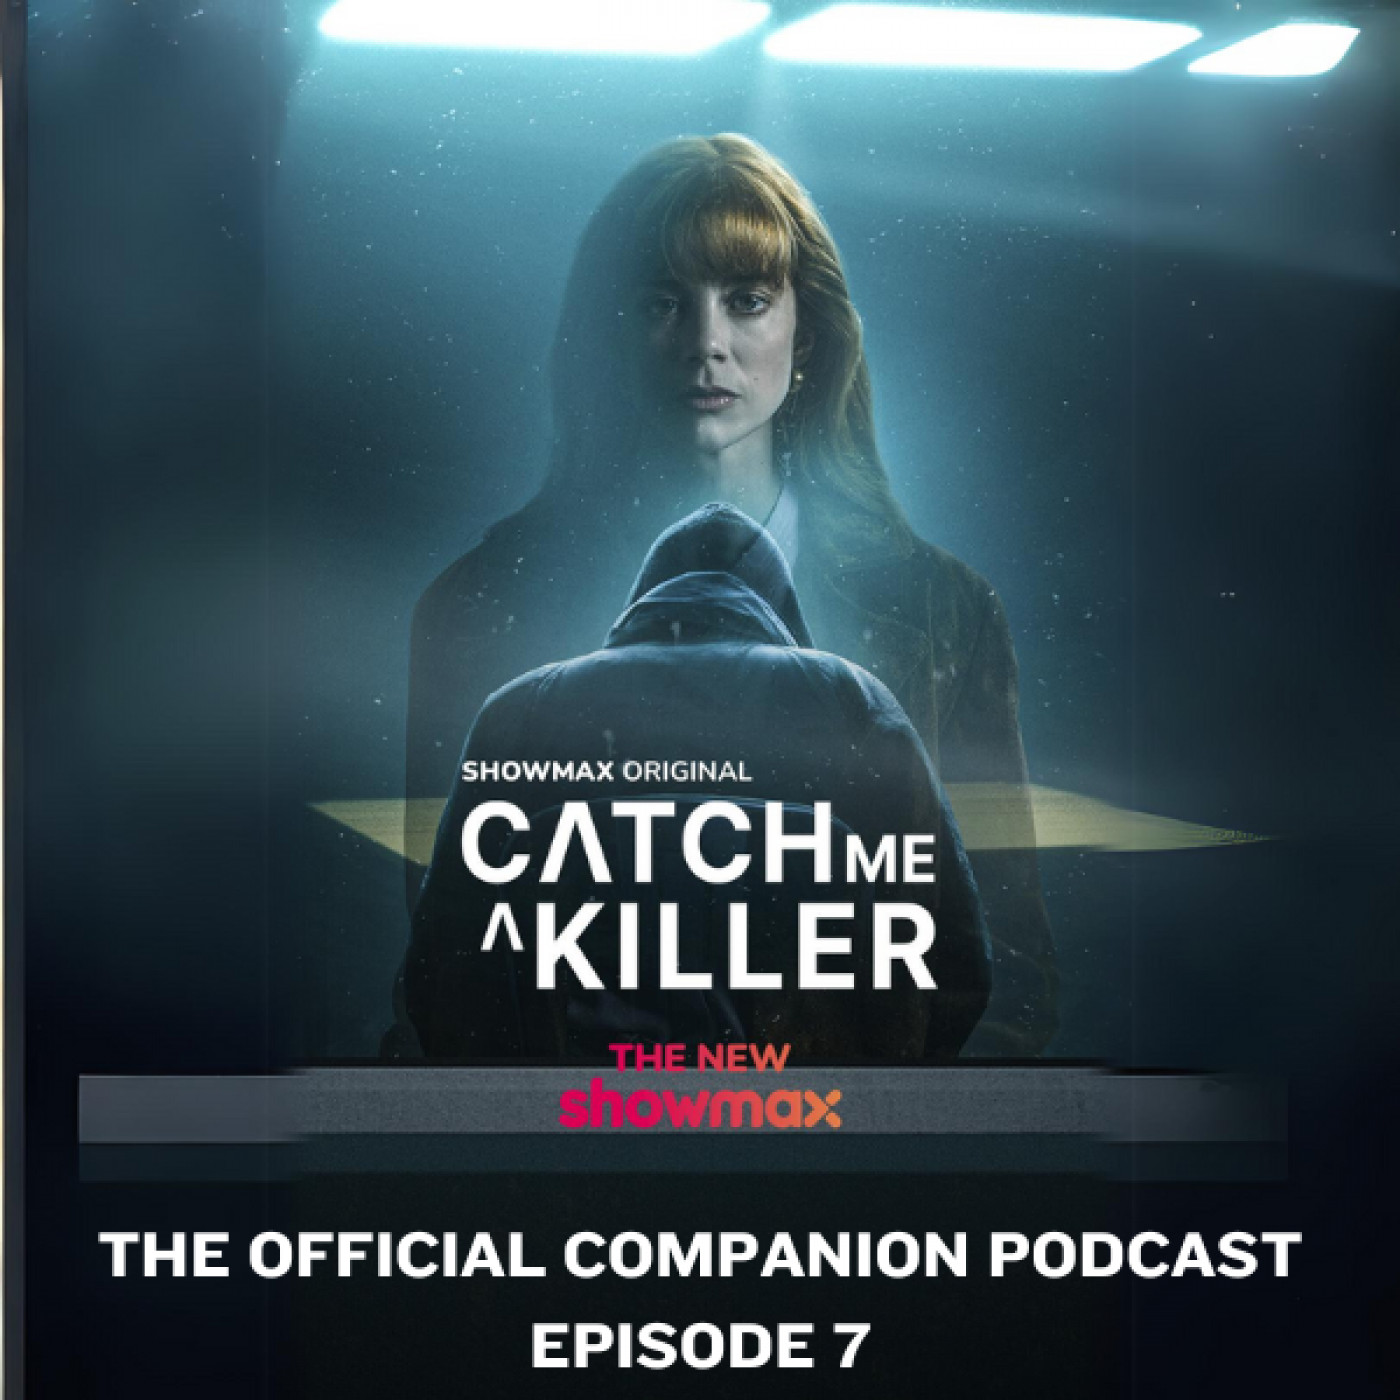 Catch Me A Killer: Official Companion Podcast Brought to you by Showmax (Episode 7)